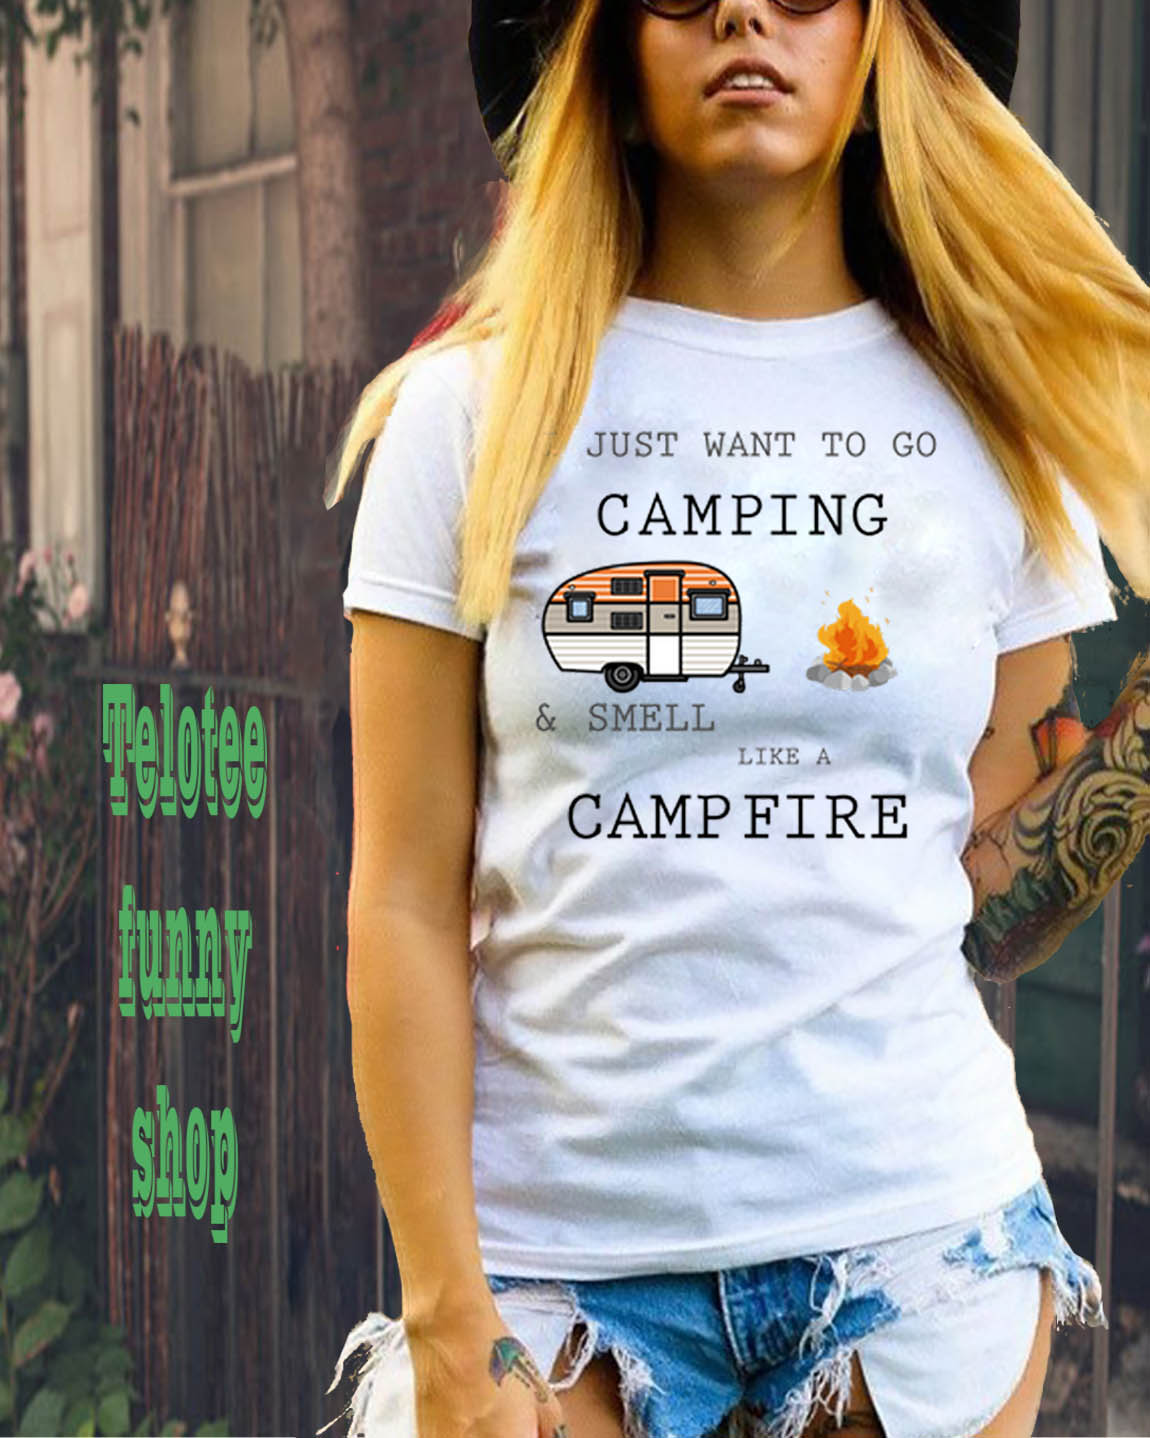 I just want to go camping & smell like a campfire